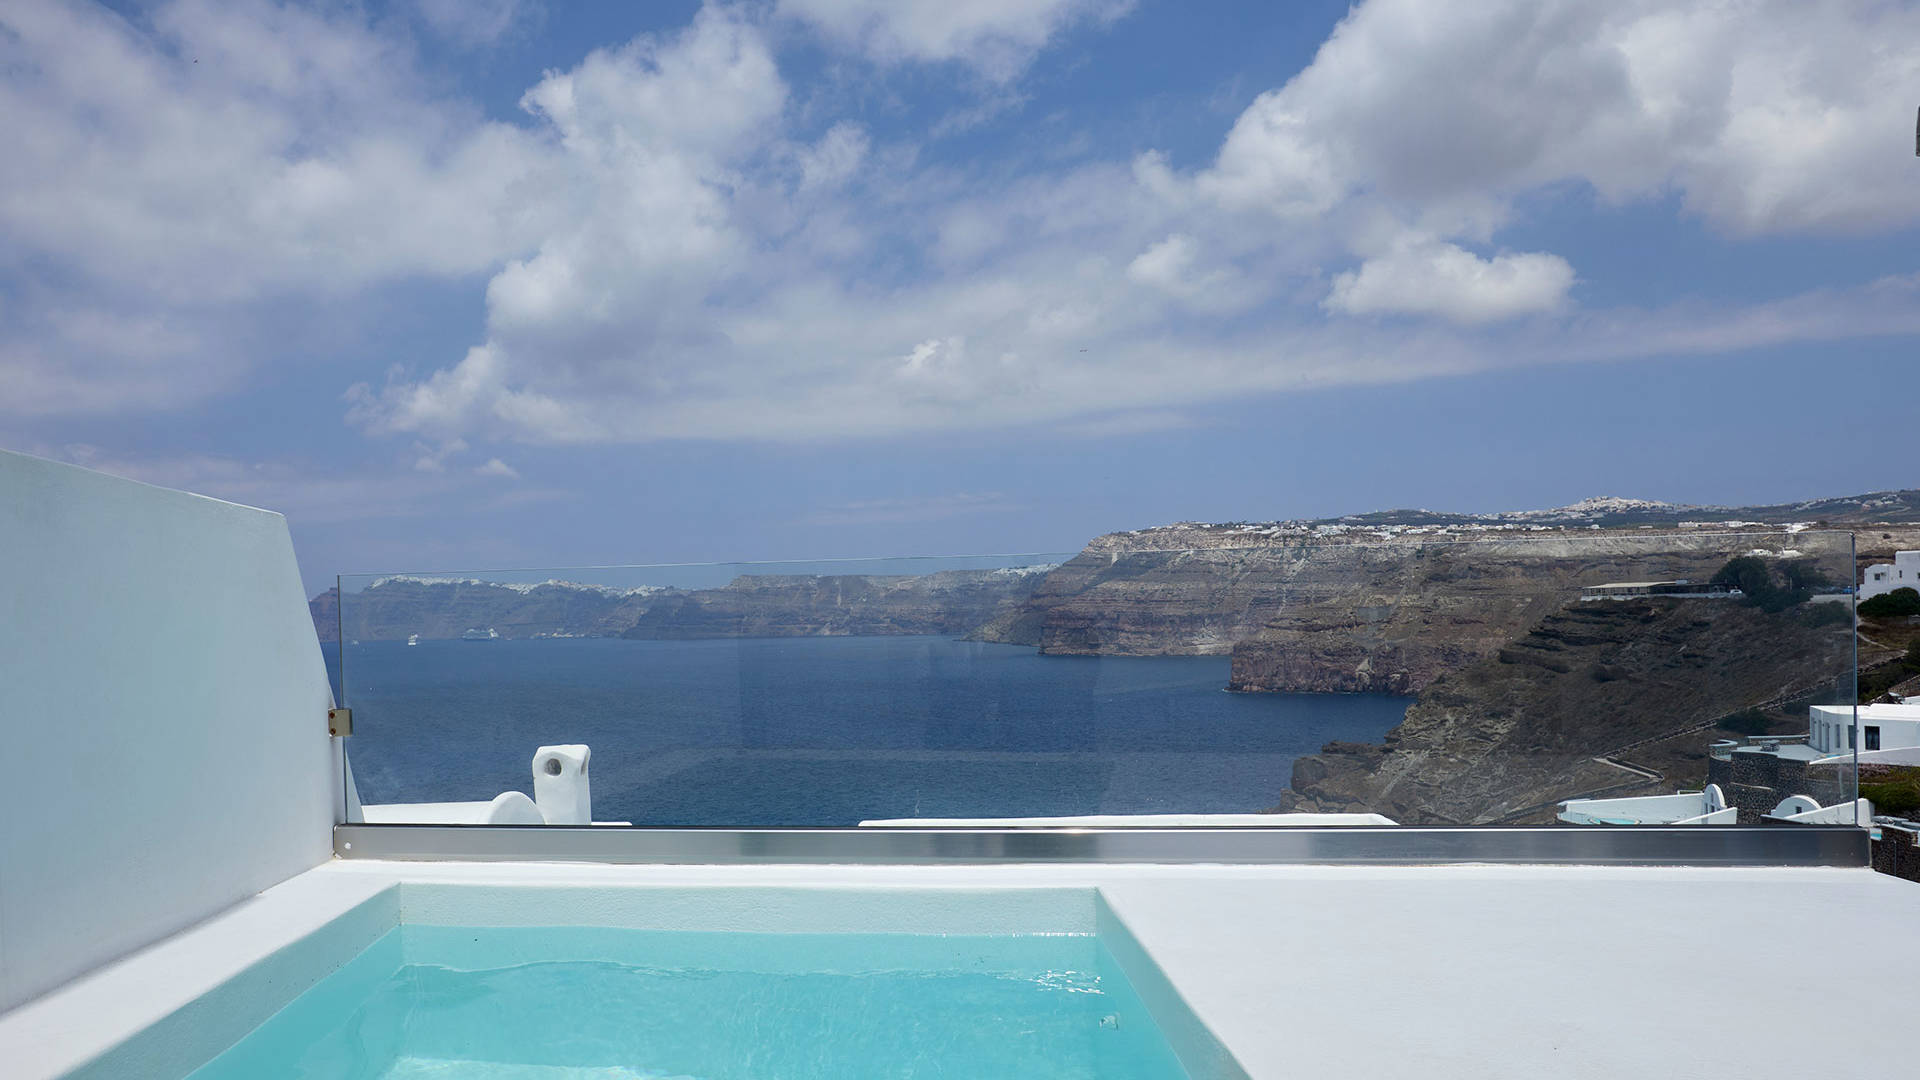 
Santorini View Hotel Deluxe Double room with Panoramic sea Caldera View and balcony with Hot Tub